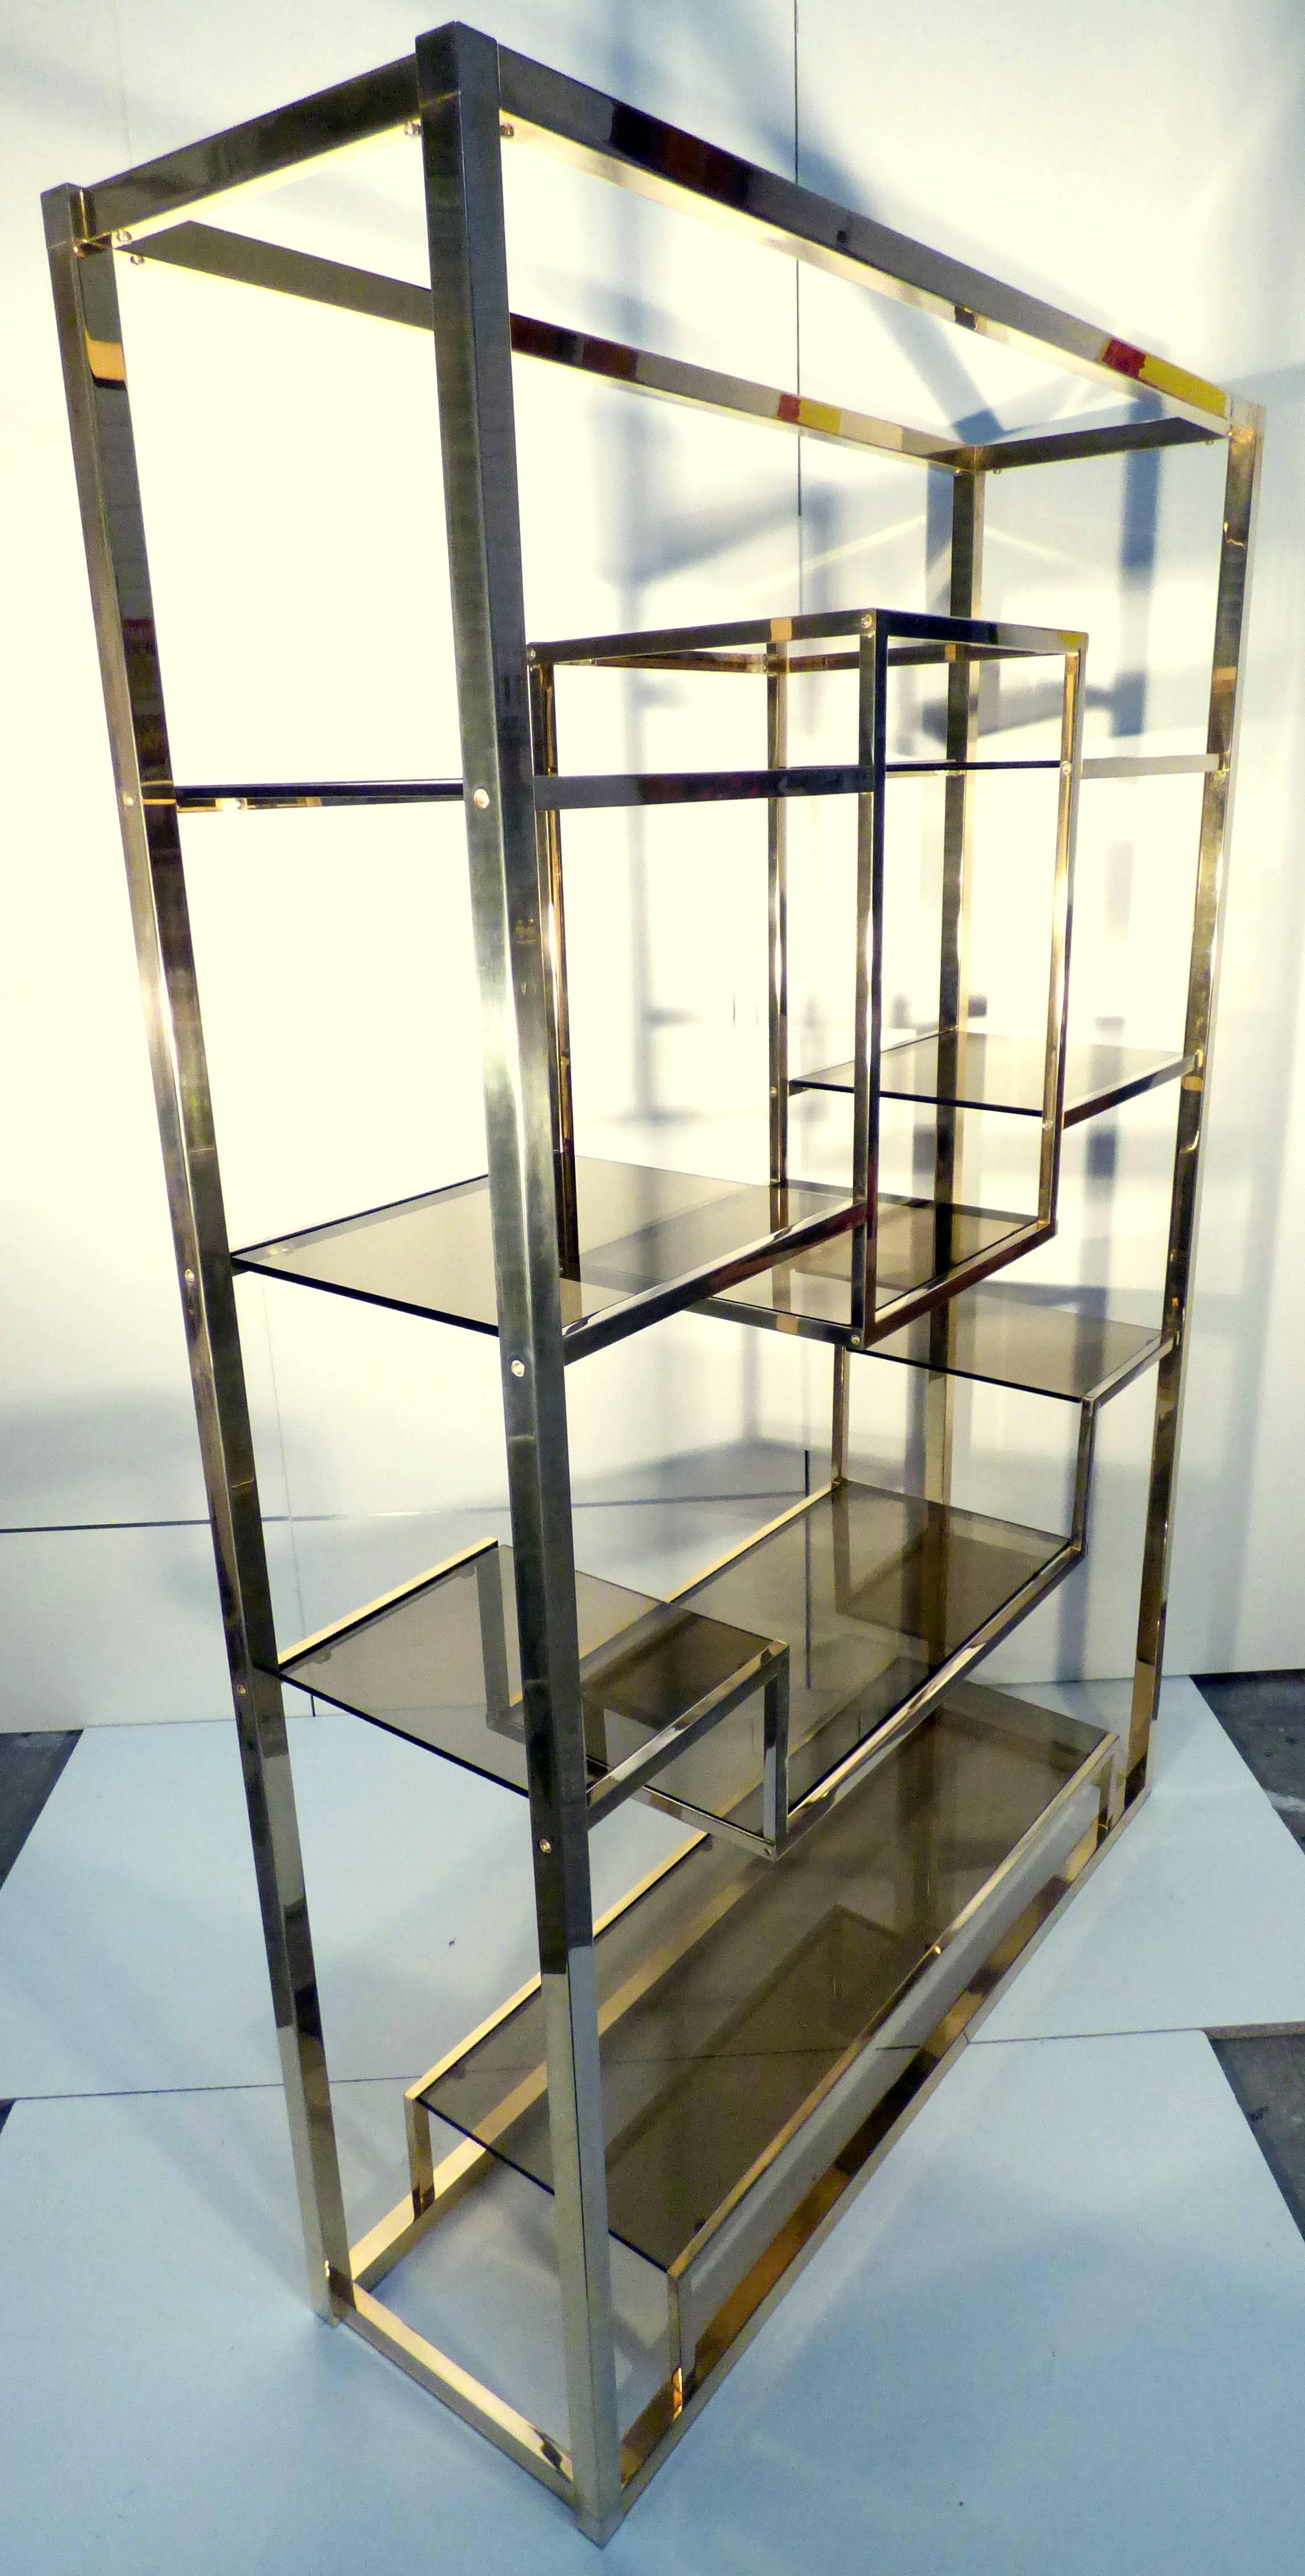 Very unique spatial shelf by Romeo Rega made of solid polished brass shelving structure with smoked glass shelves. Will work perfectly as a floating room divider. The whole item is in excellent condition.

For shipping costs, just send us a short